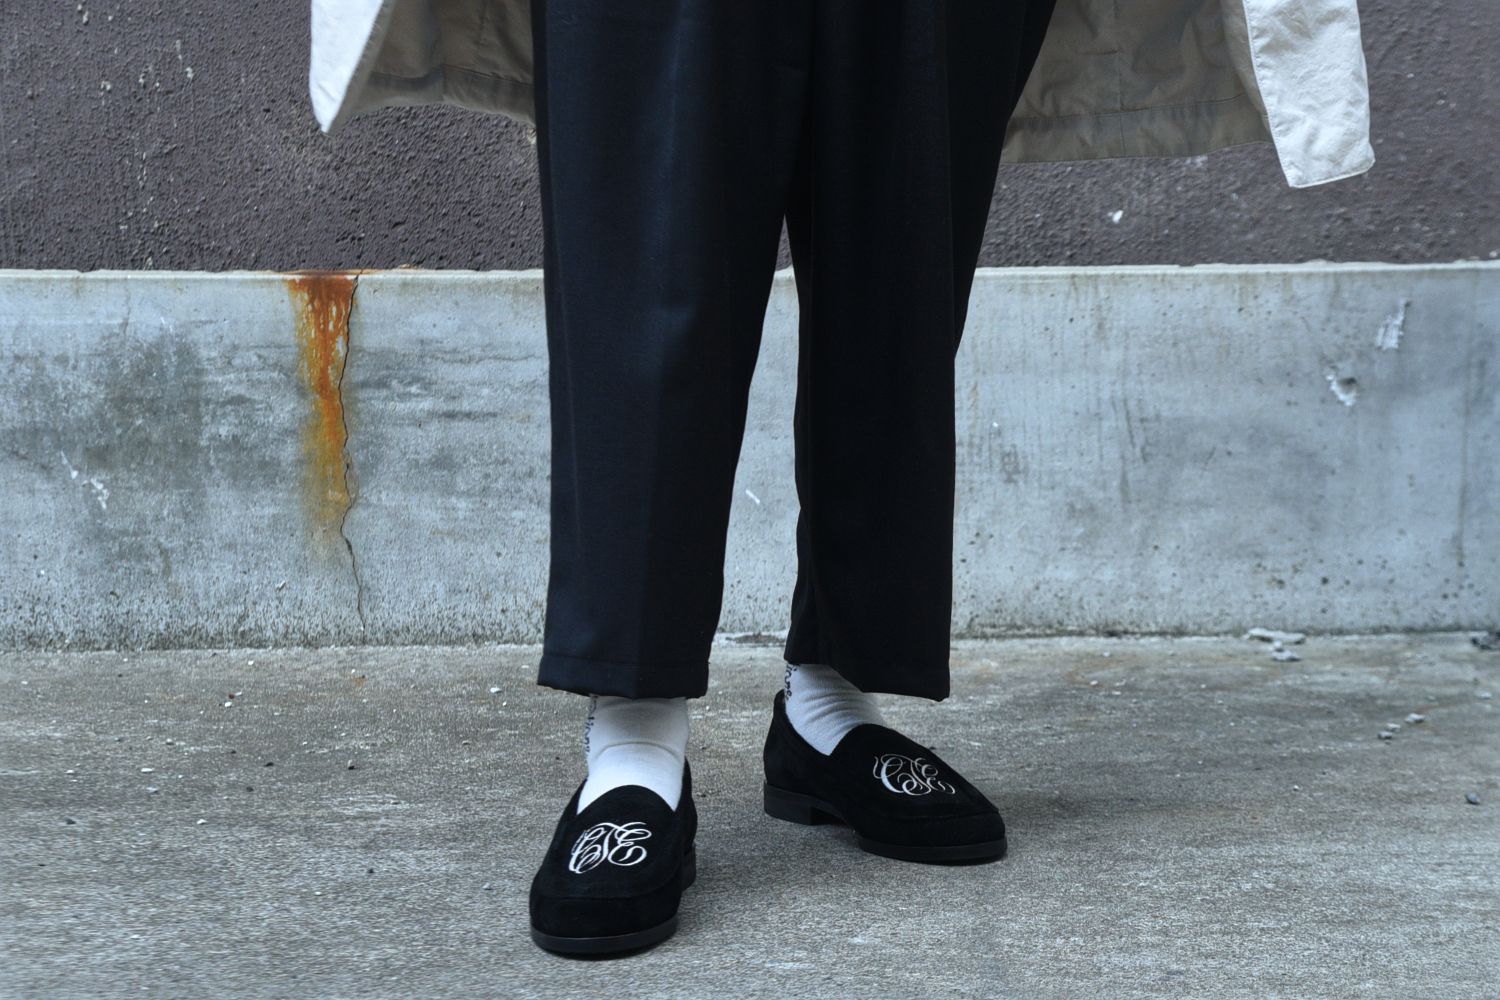 COOTIE Raza House Shoes - モカシン